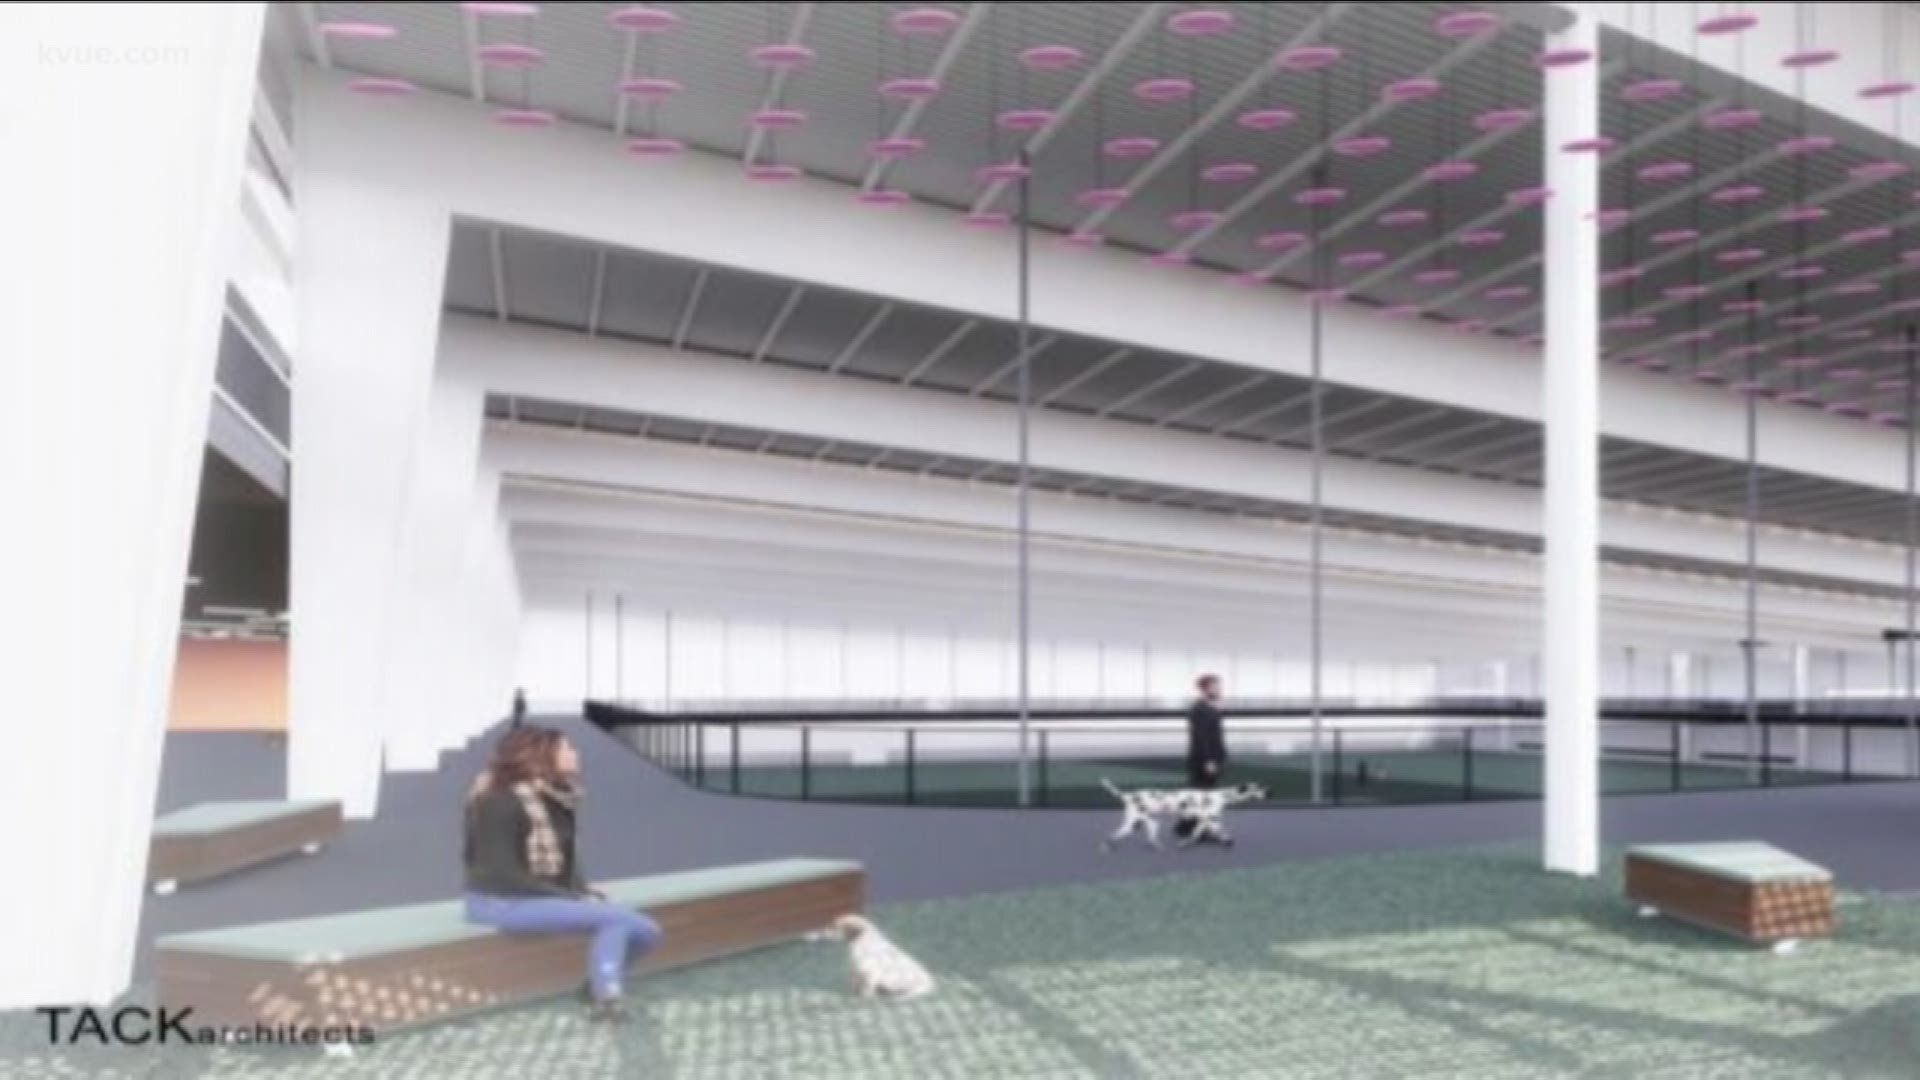 Austin will soon be home to one of the largest indoor dog parks ever built. The facility will have a coffee shop, a dog walking track and more.